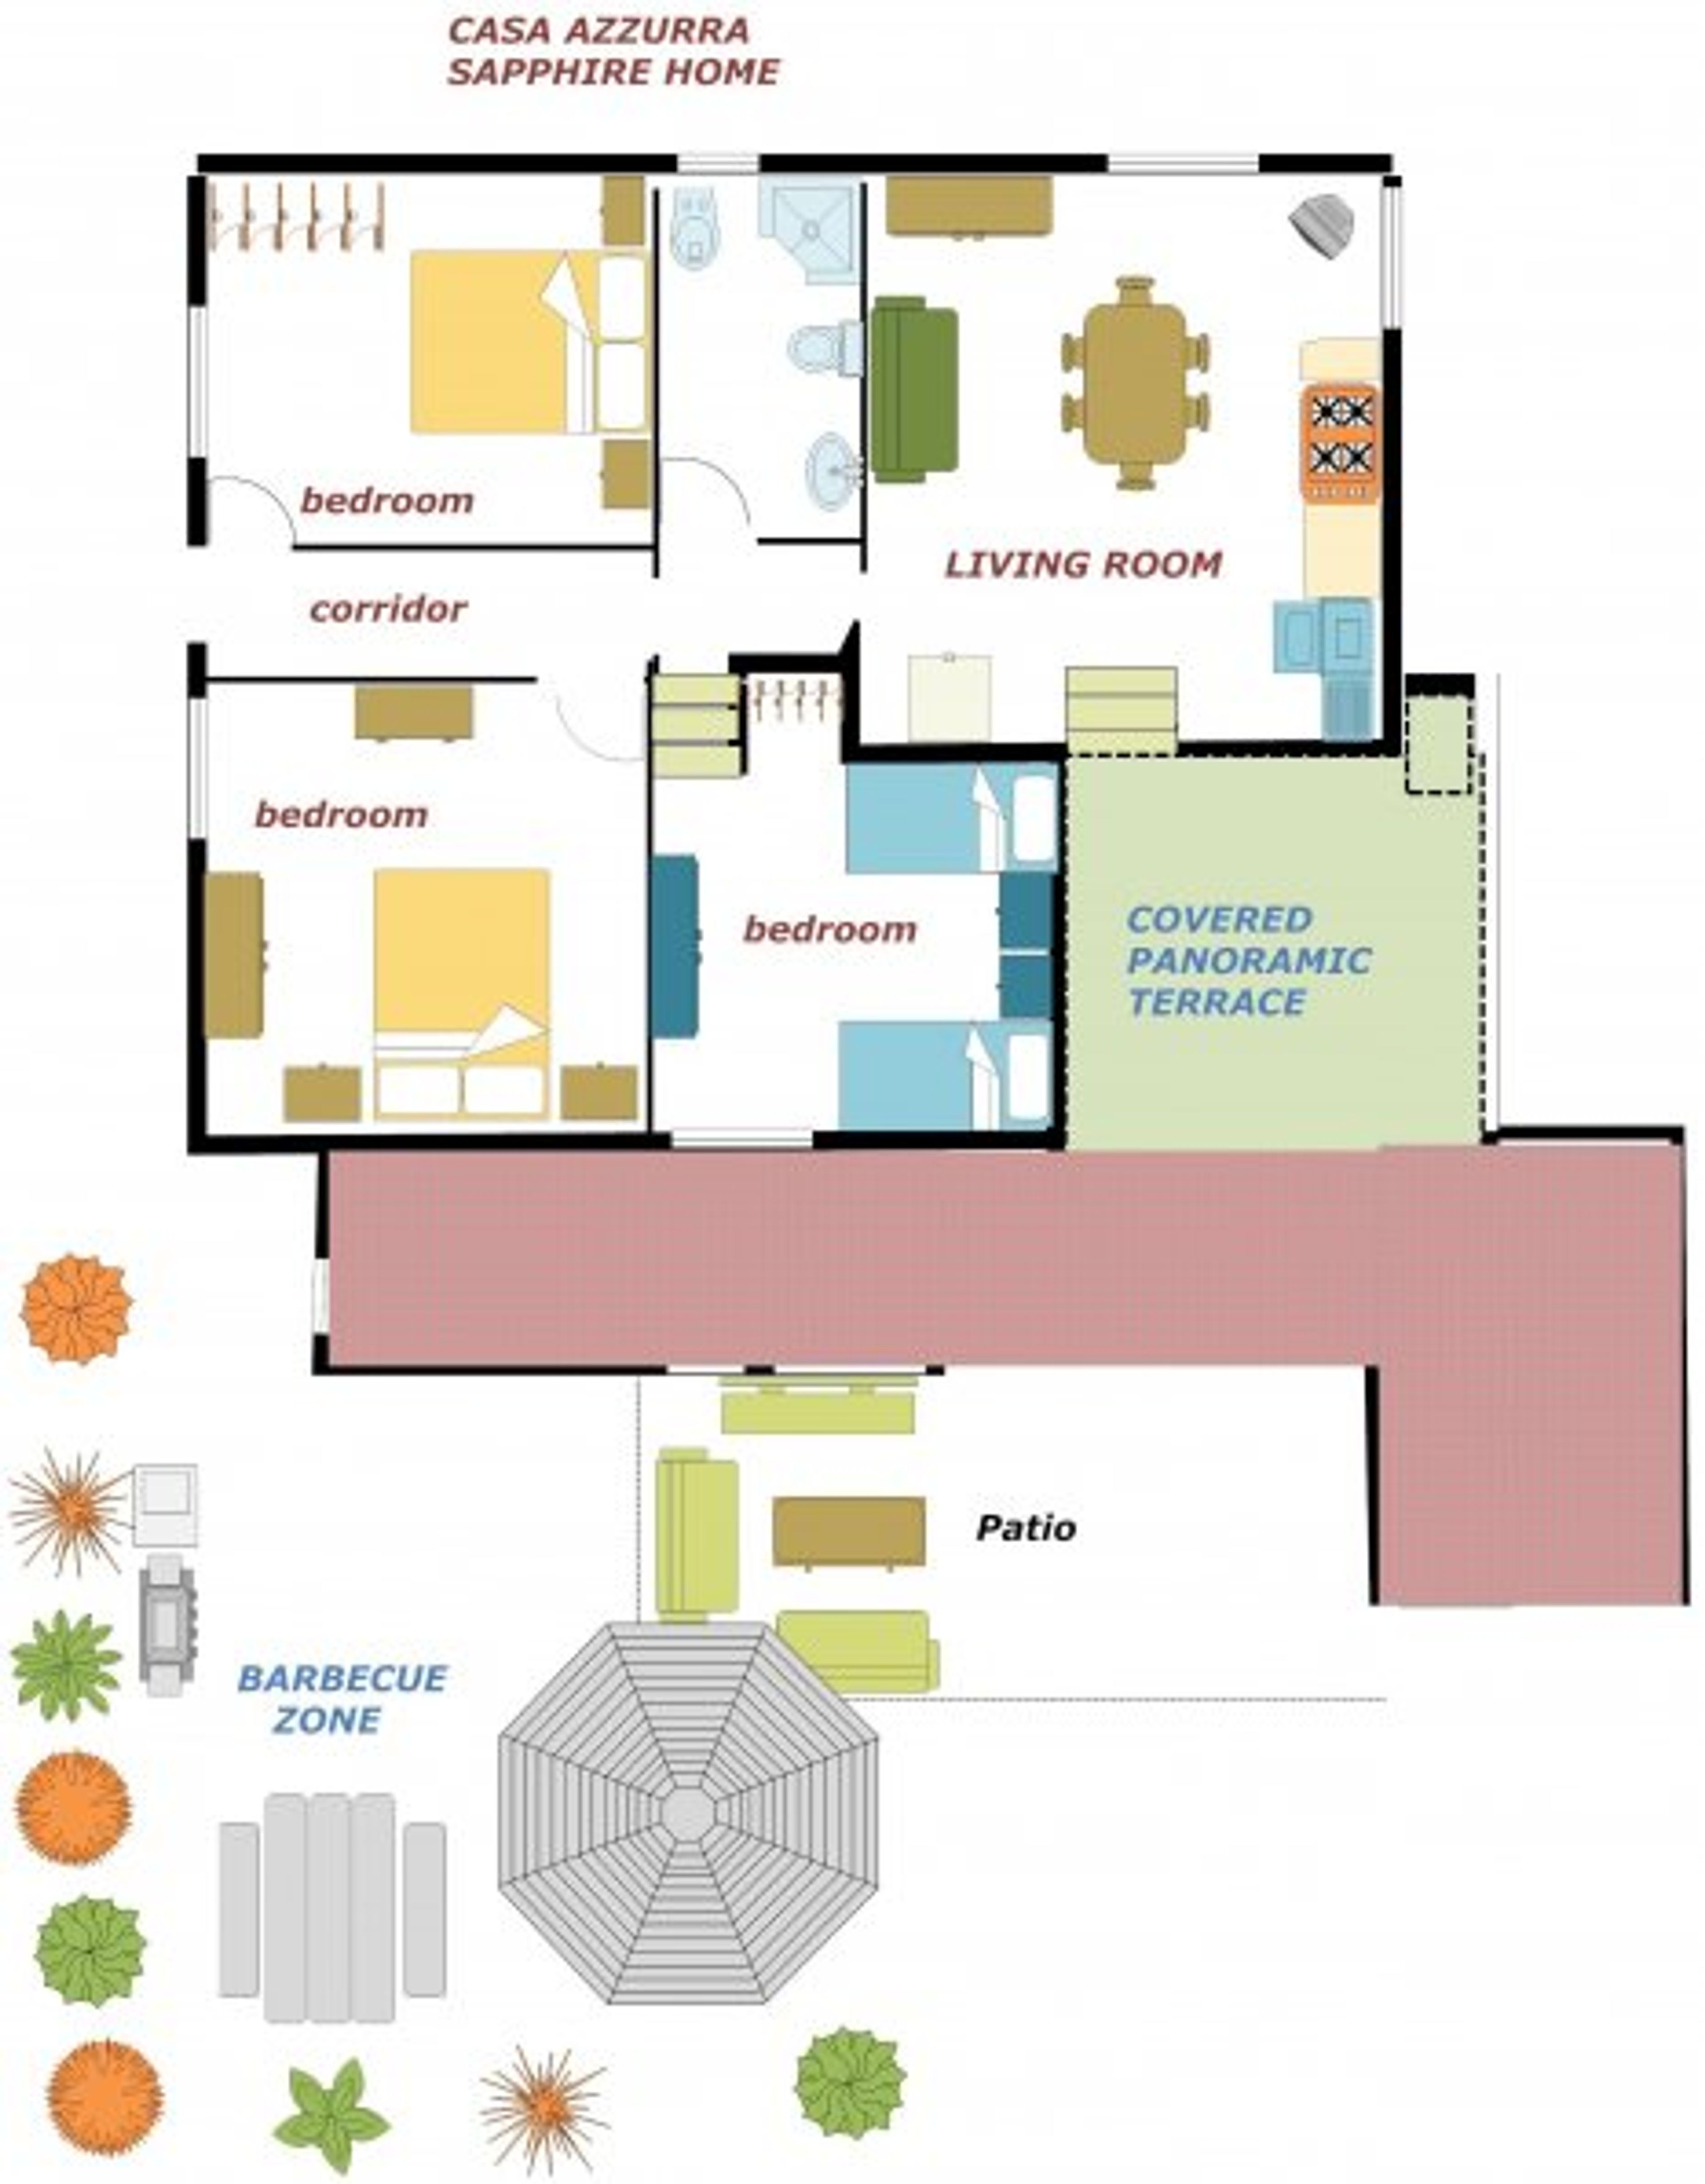 PLAN OF THE APARTMENT